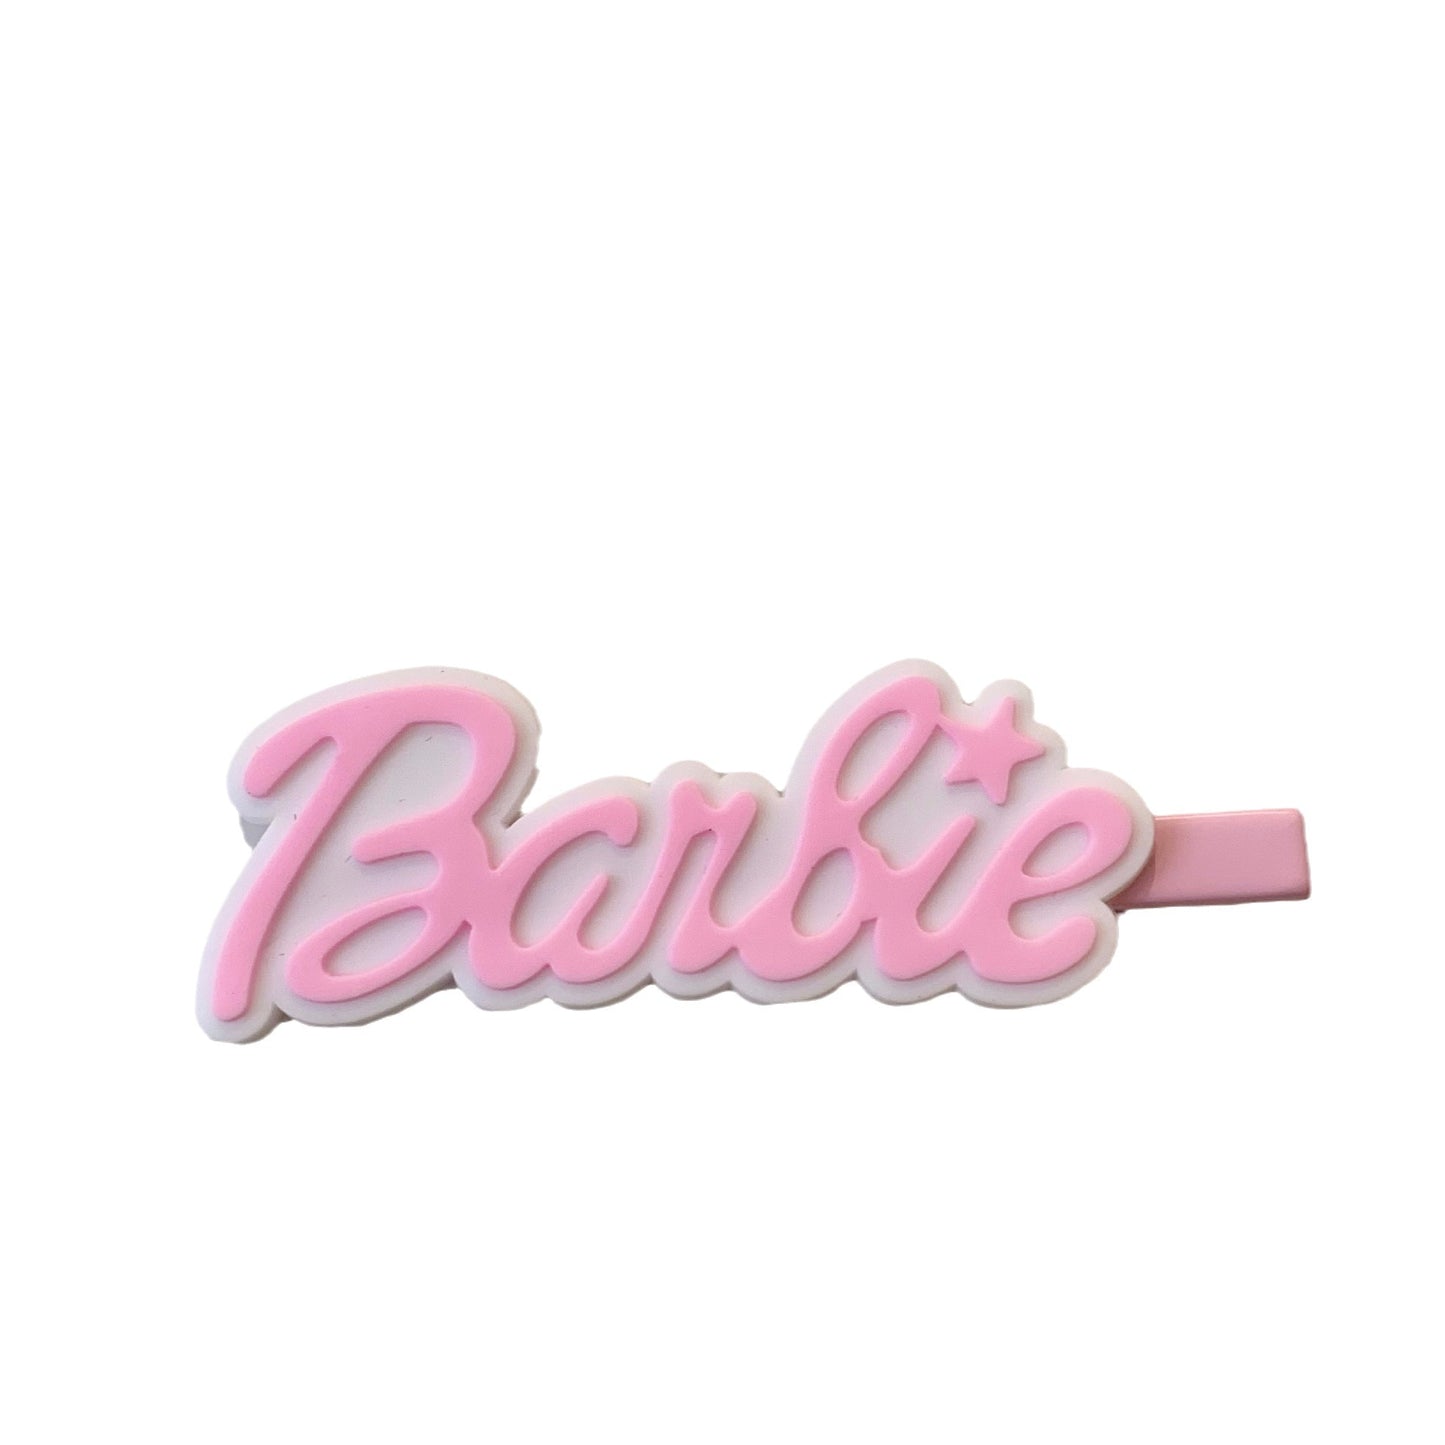 Kawaii Hand Made Barbie Hairpin Accessories Hottie Ins Japanese and Korean Cute Style Hobby Pin for Girl Jewelry Collection Gift